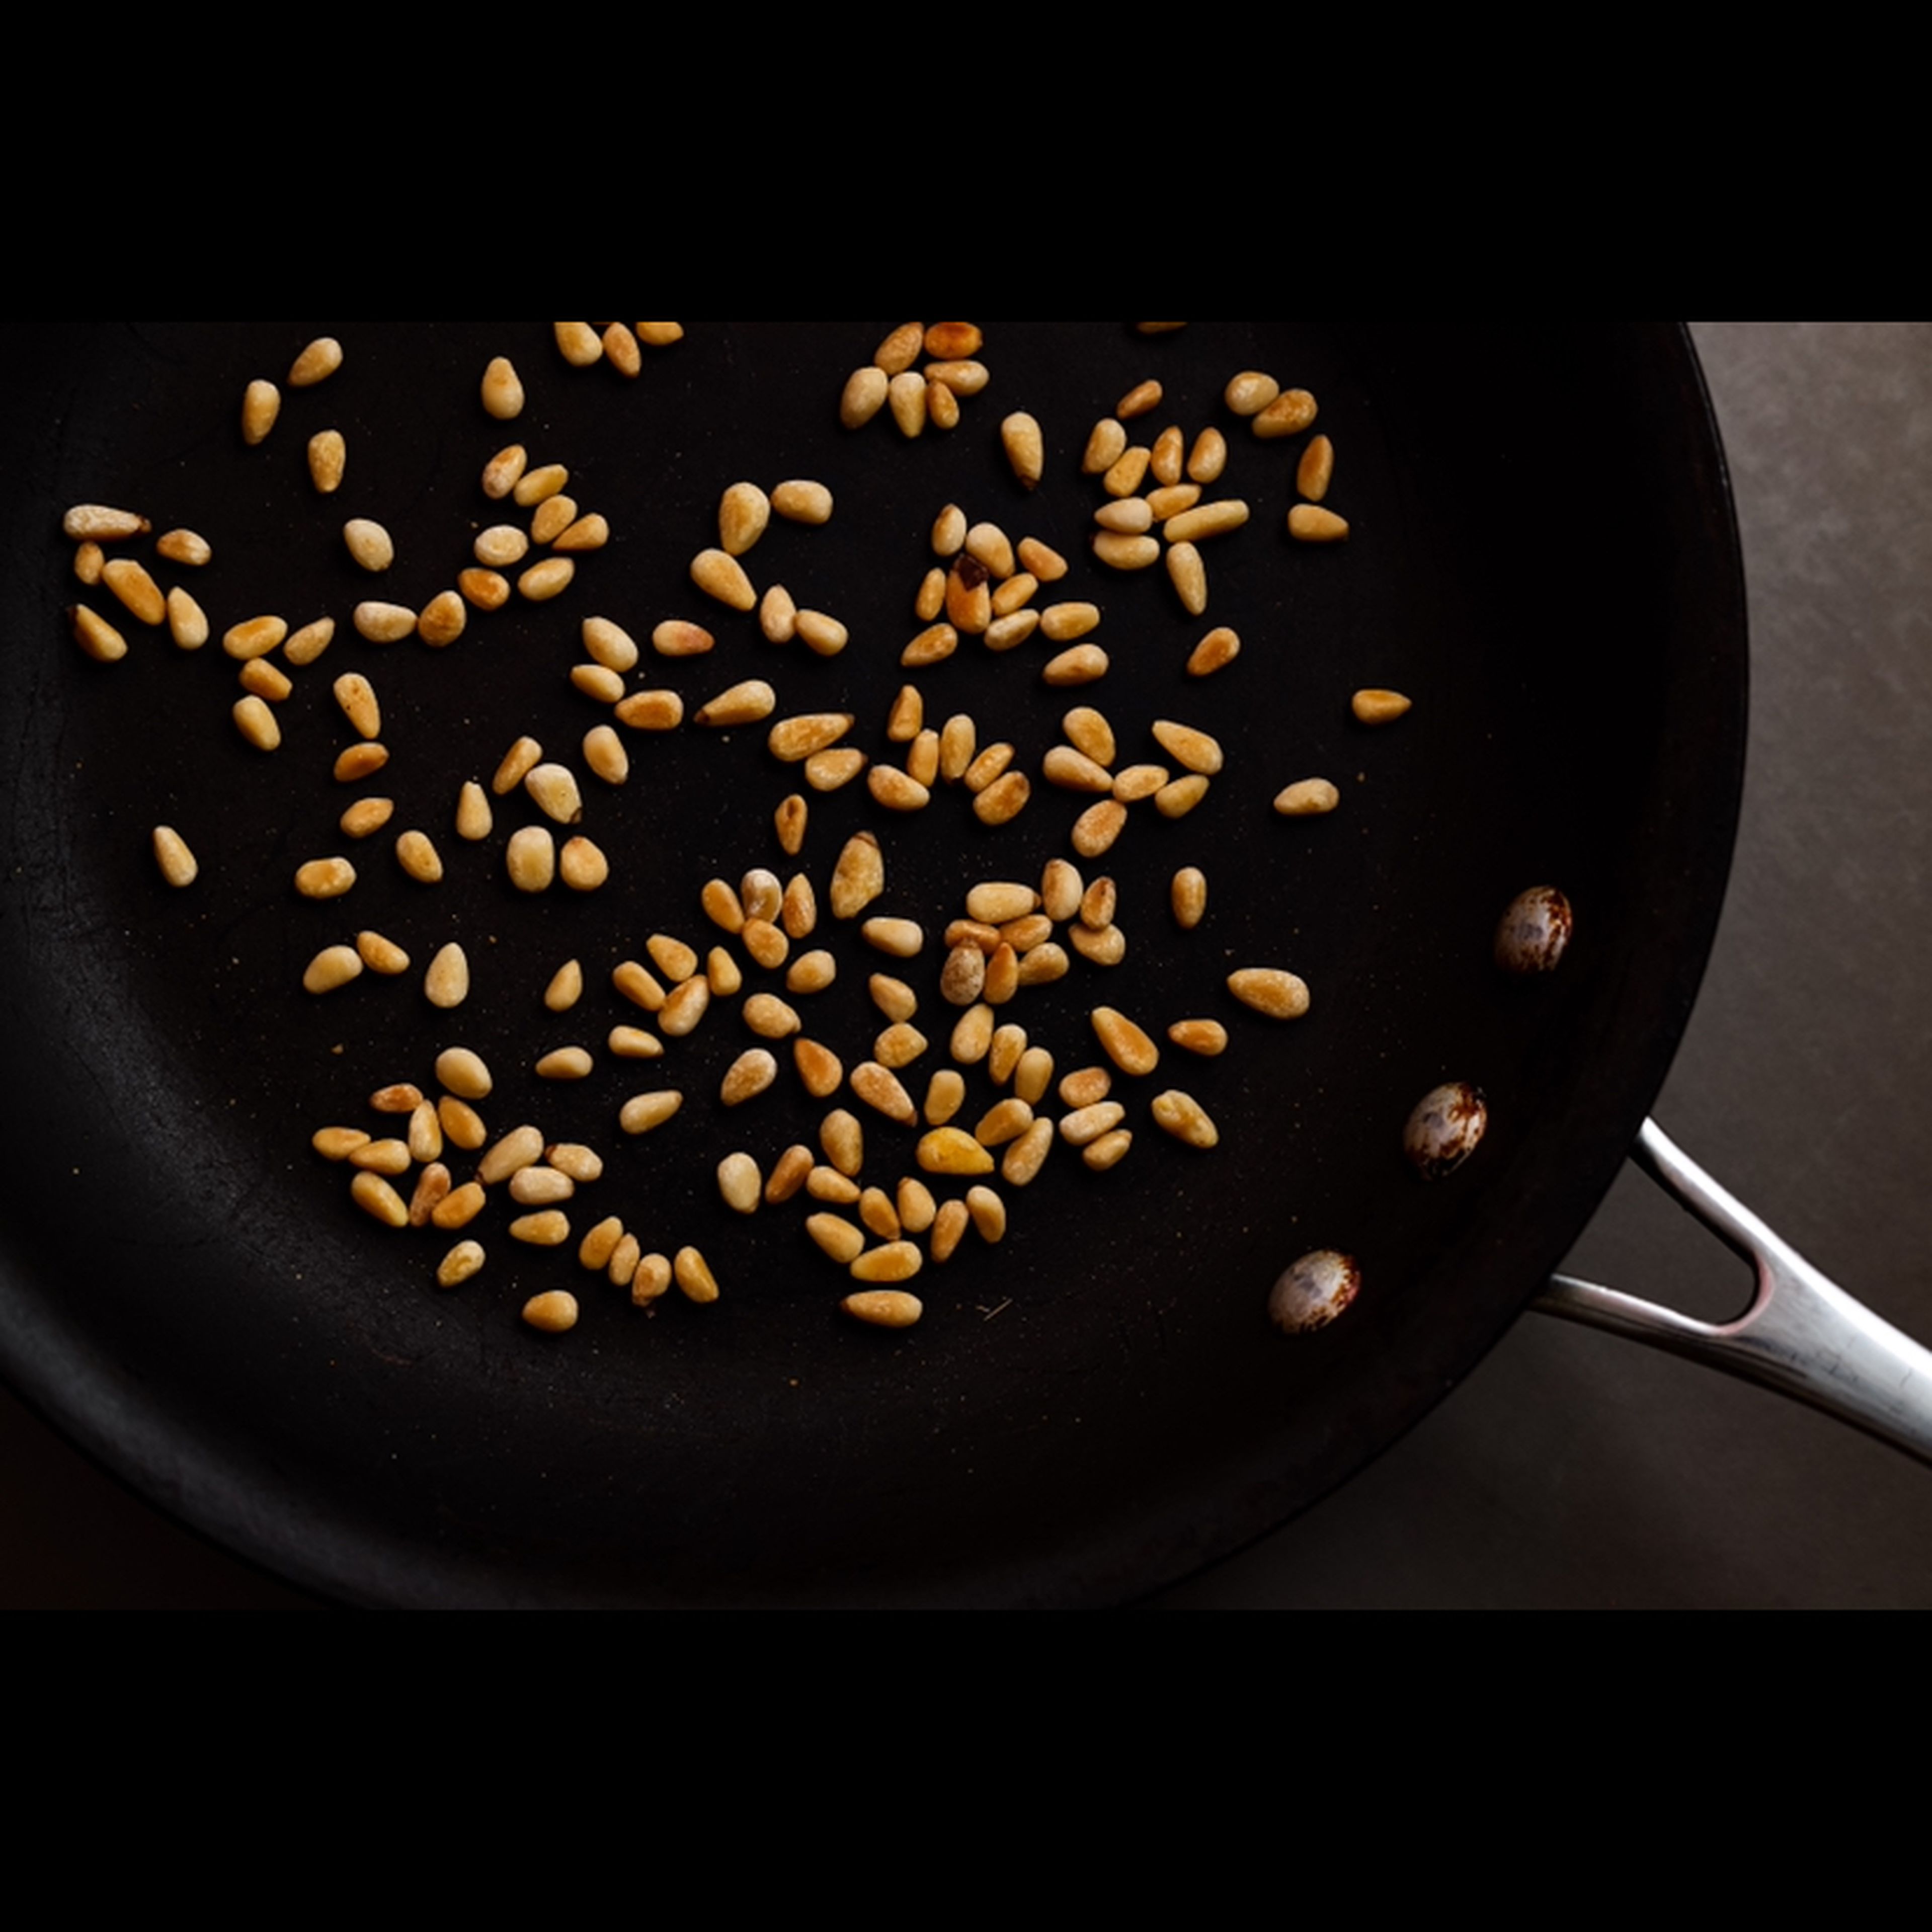 Toast the pine nuts in a pan until golden and fragrant.